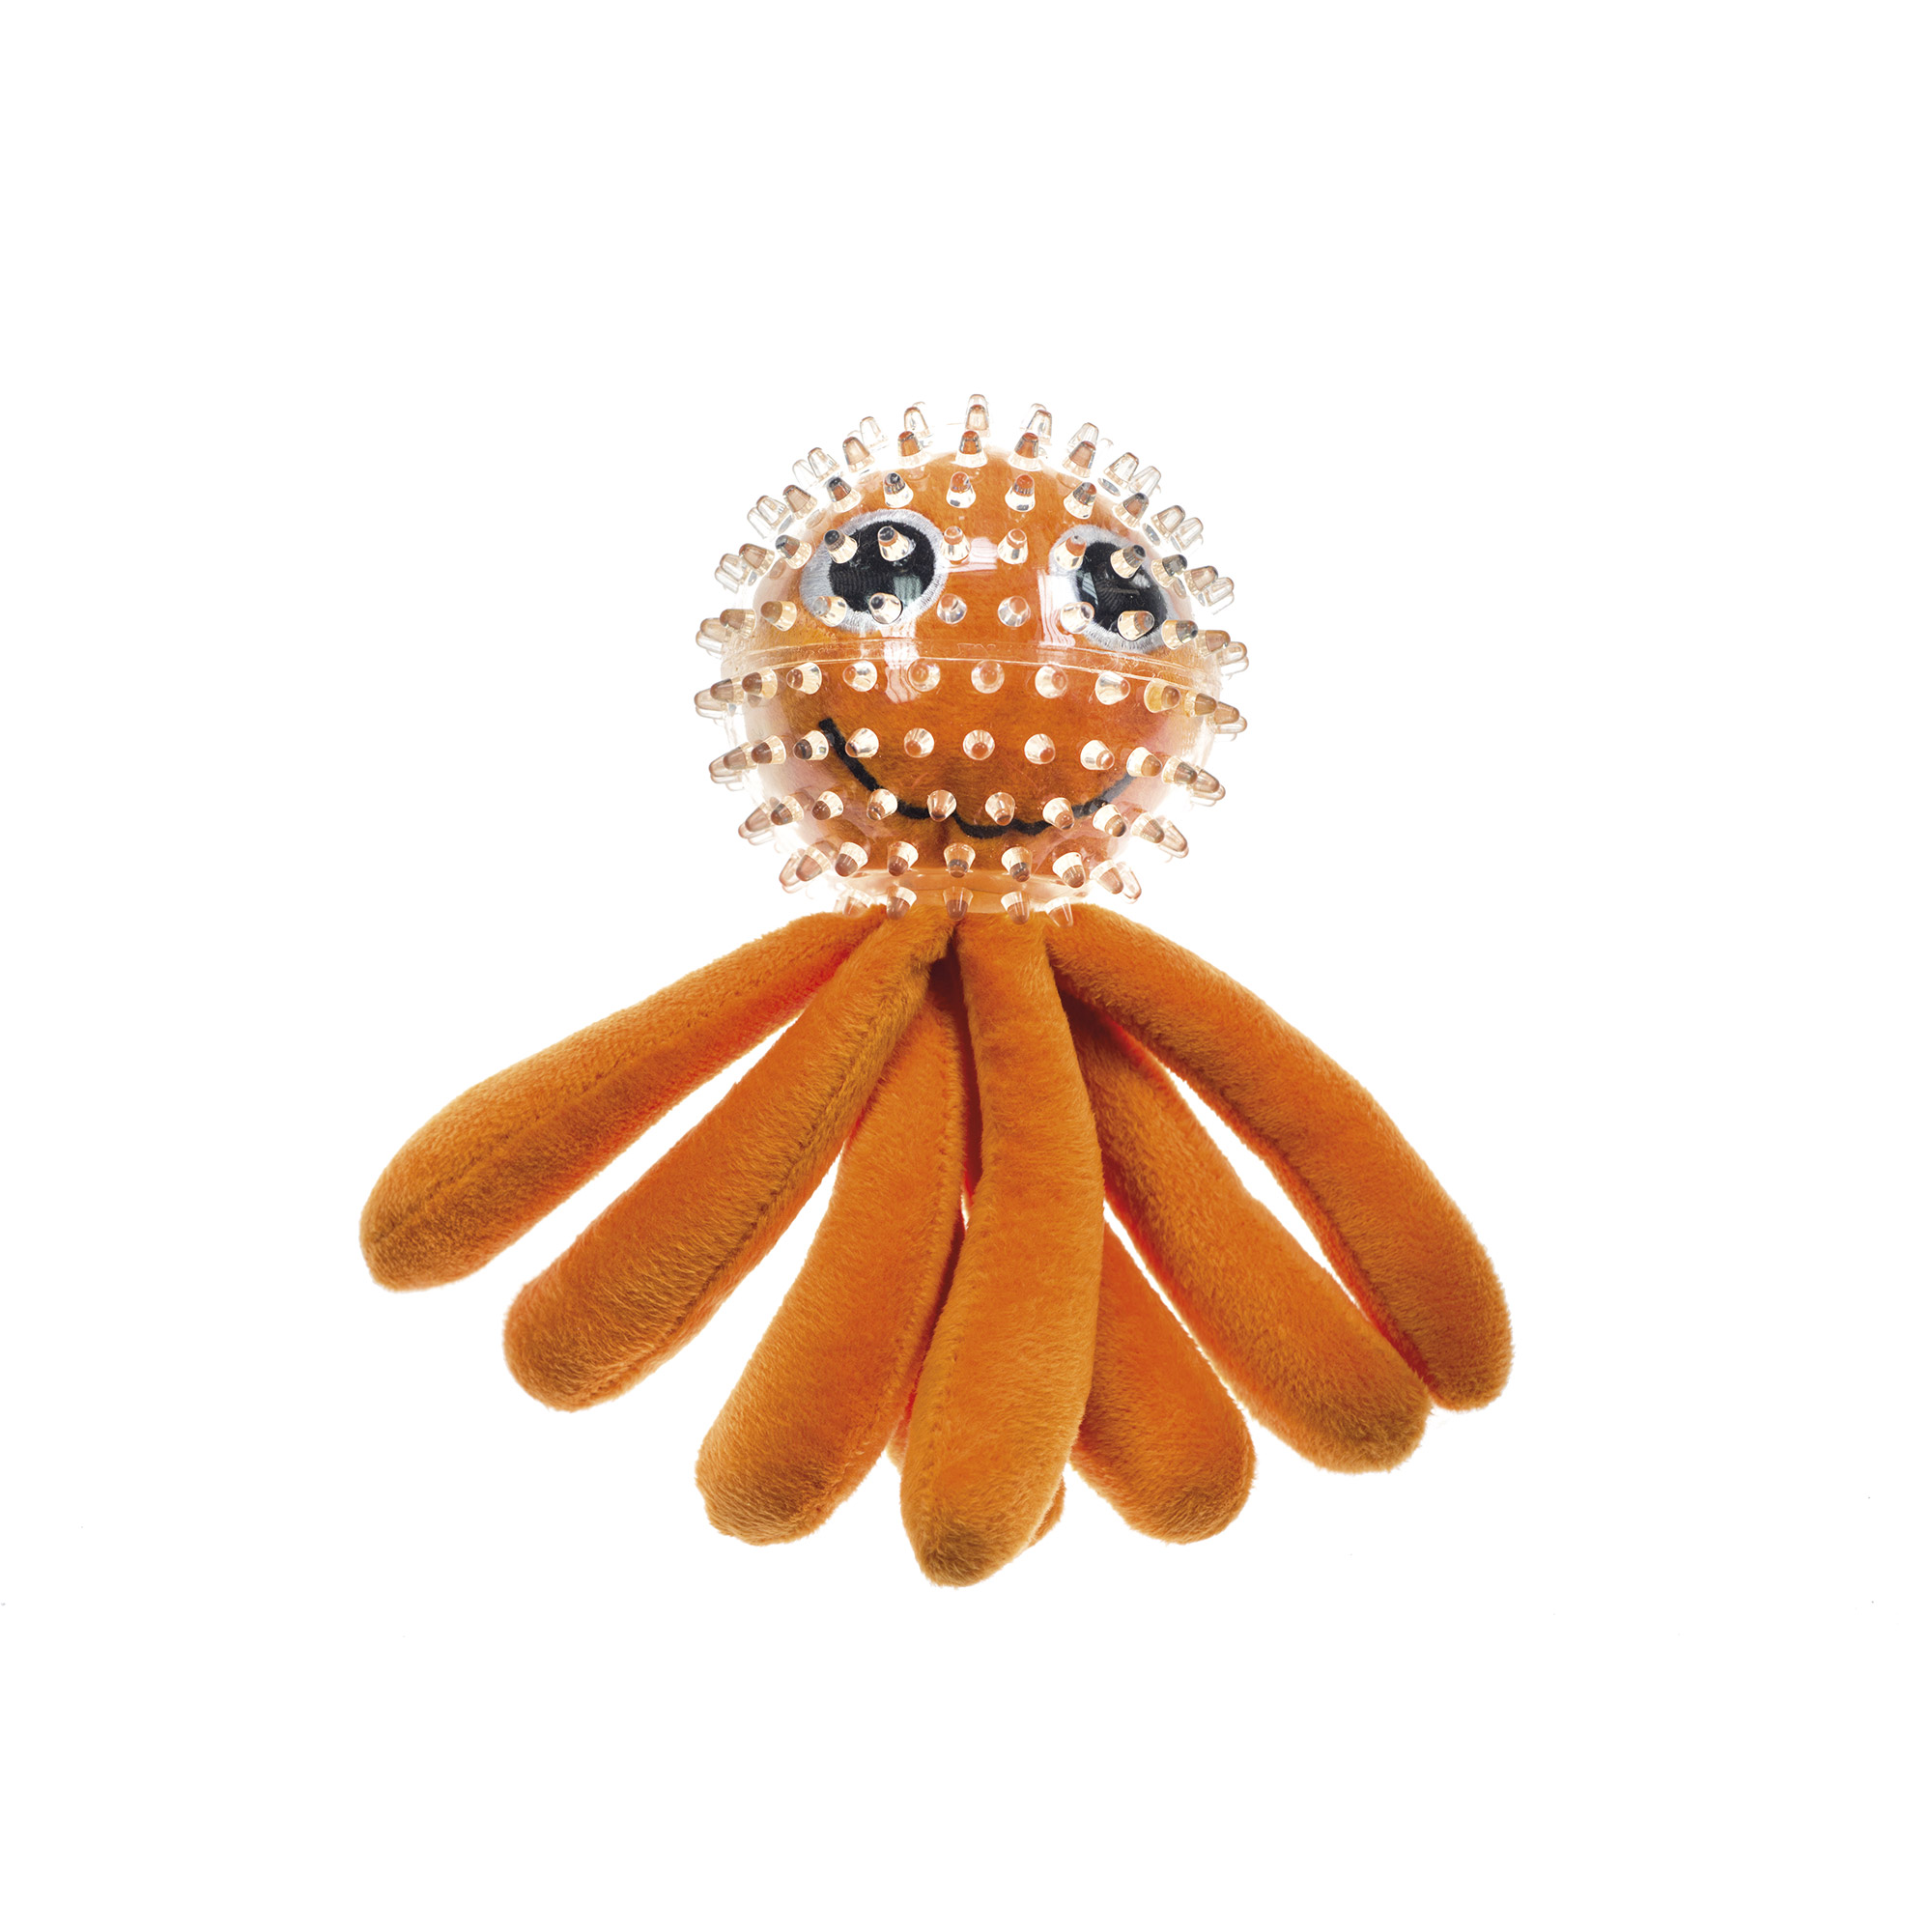 PLASTIC BALL WITH FABRIC OCTOPUS 2 IN 1 TOY-0